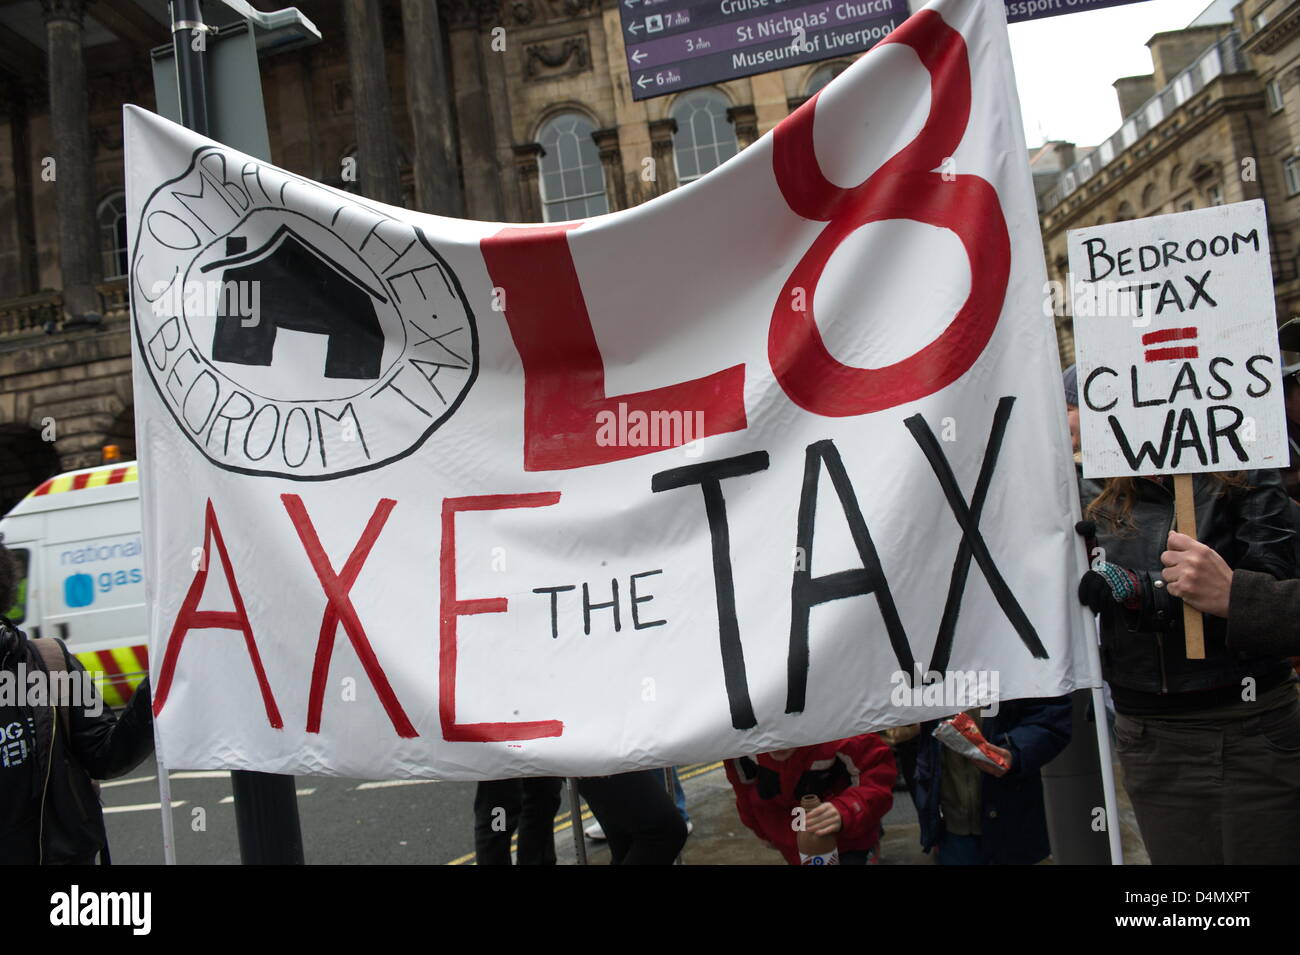 Liverpool, UK. Saturday 16th March 2013. Axe the Tax banner and a sign saying 'Bedroom Tax = Class War'.  As part of nationwide protests, campaigners gathered in Liverpool city centre to demonstrate against a new 'bedroom tax' that will cut benefits to people with a spare room. Credit: David Colbran/Alamy Live News Stock Photo